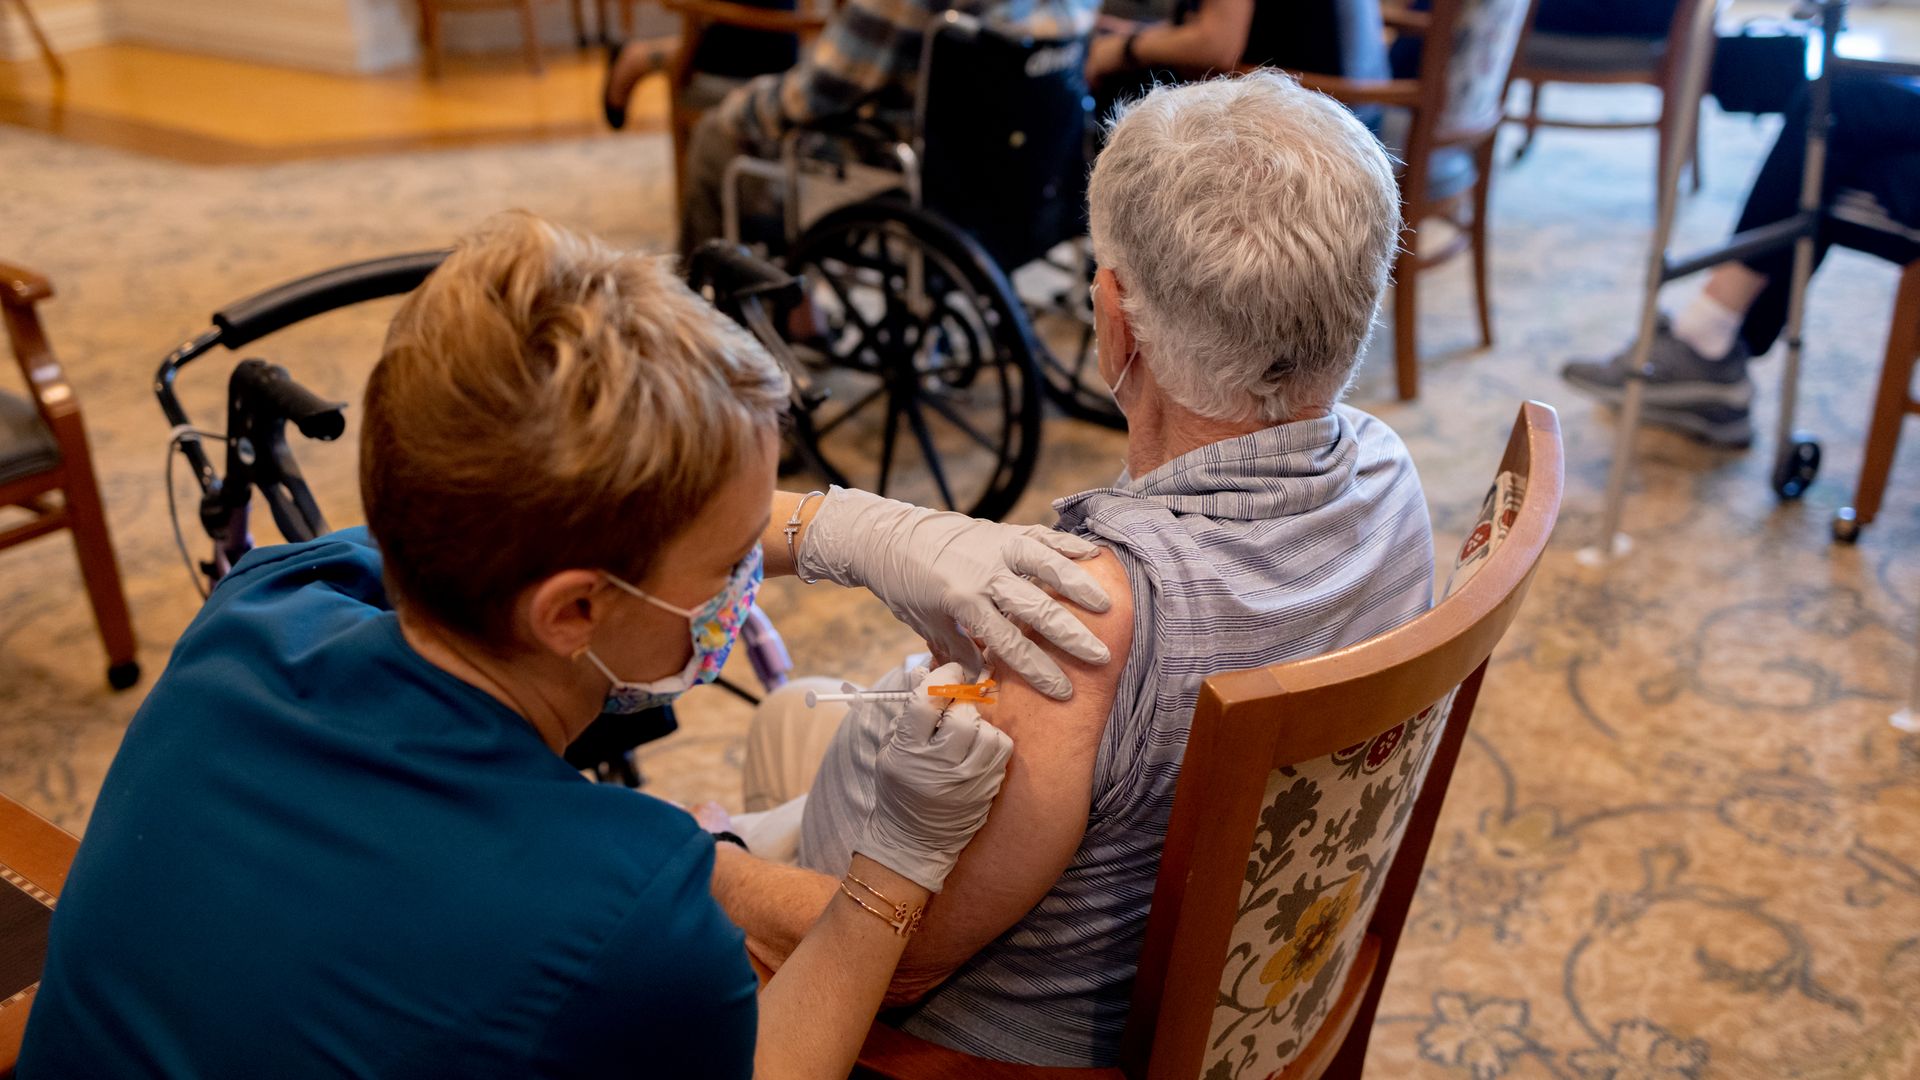 A healthcare worker administers a third dose of the Pfizer-BioNTech Covid-19 vaccine at a senior living facility in Worcester, Pennsylvania, U.S., on Wednesday, Aug. 25, 2021.